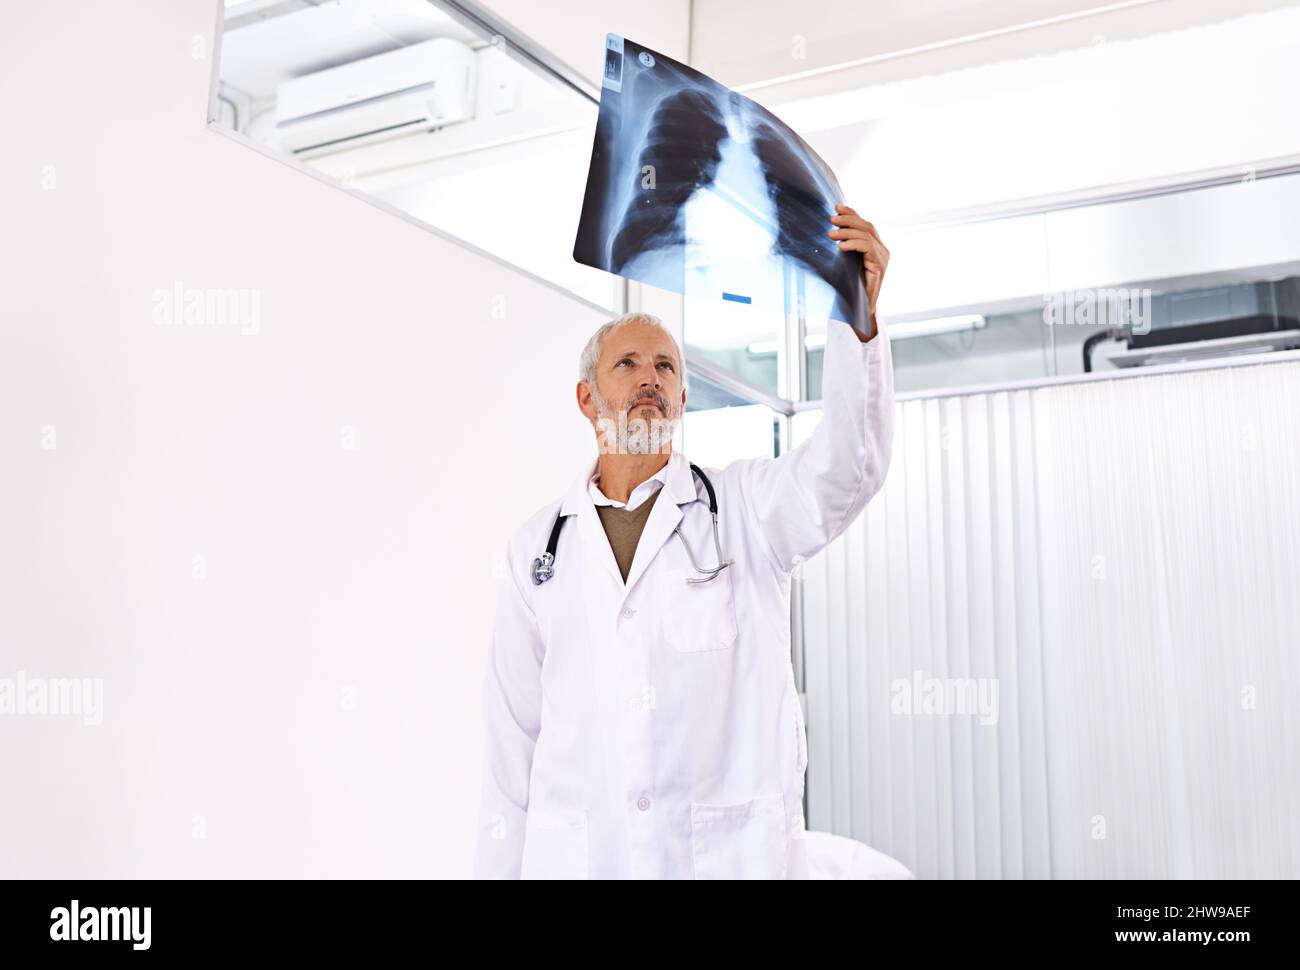 Checking out your ribcage. Shot of a mature male doctor examining an x-ray image at a hospital. Stock Photo